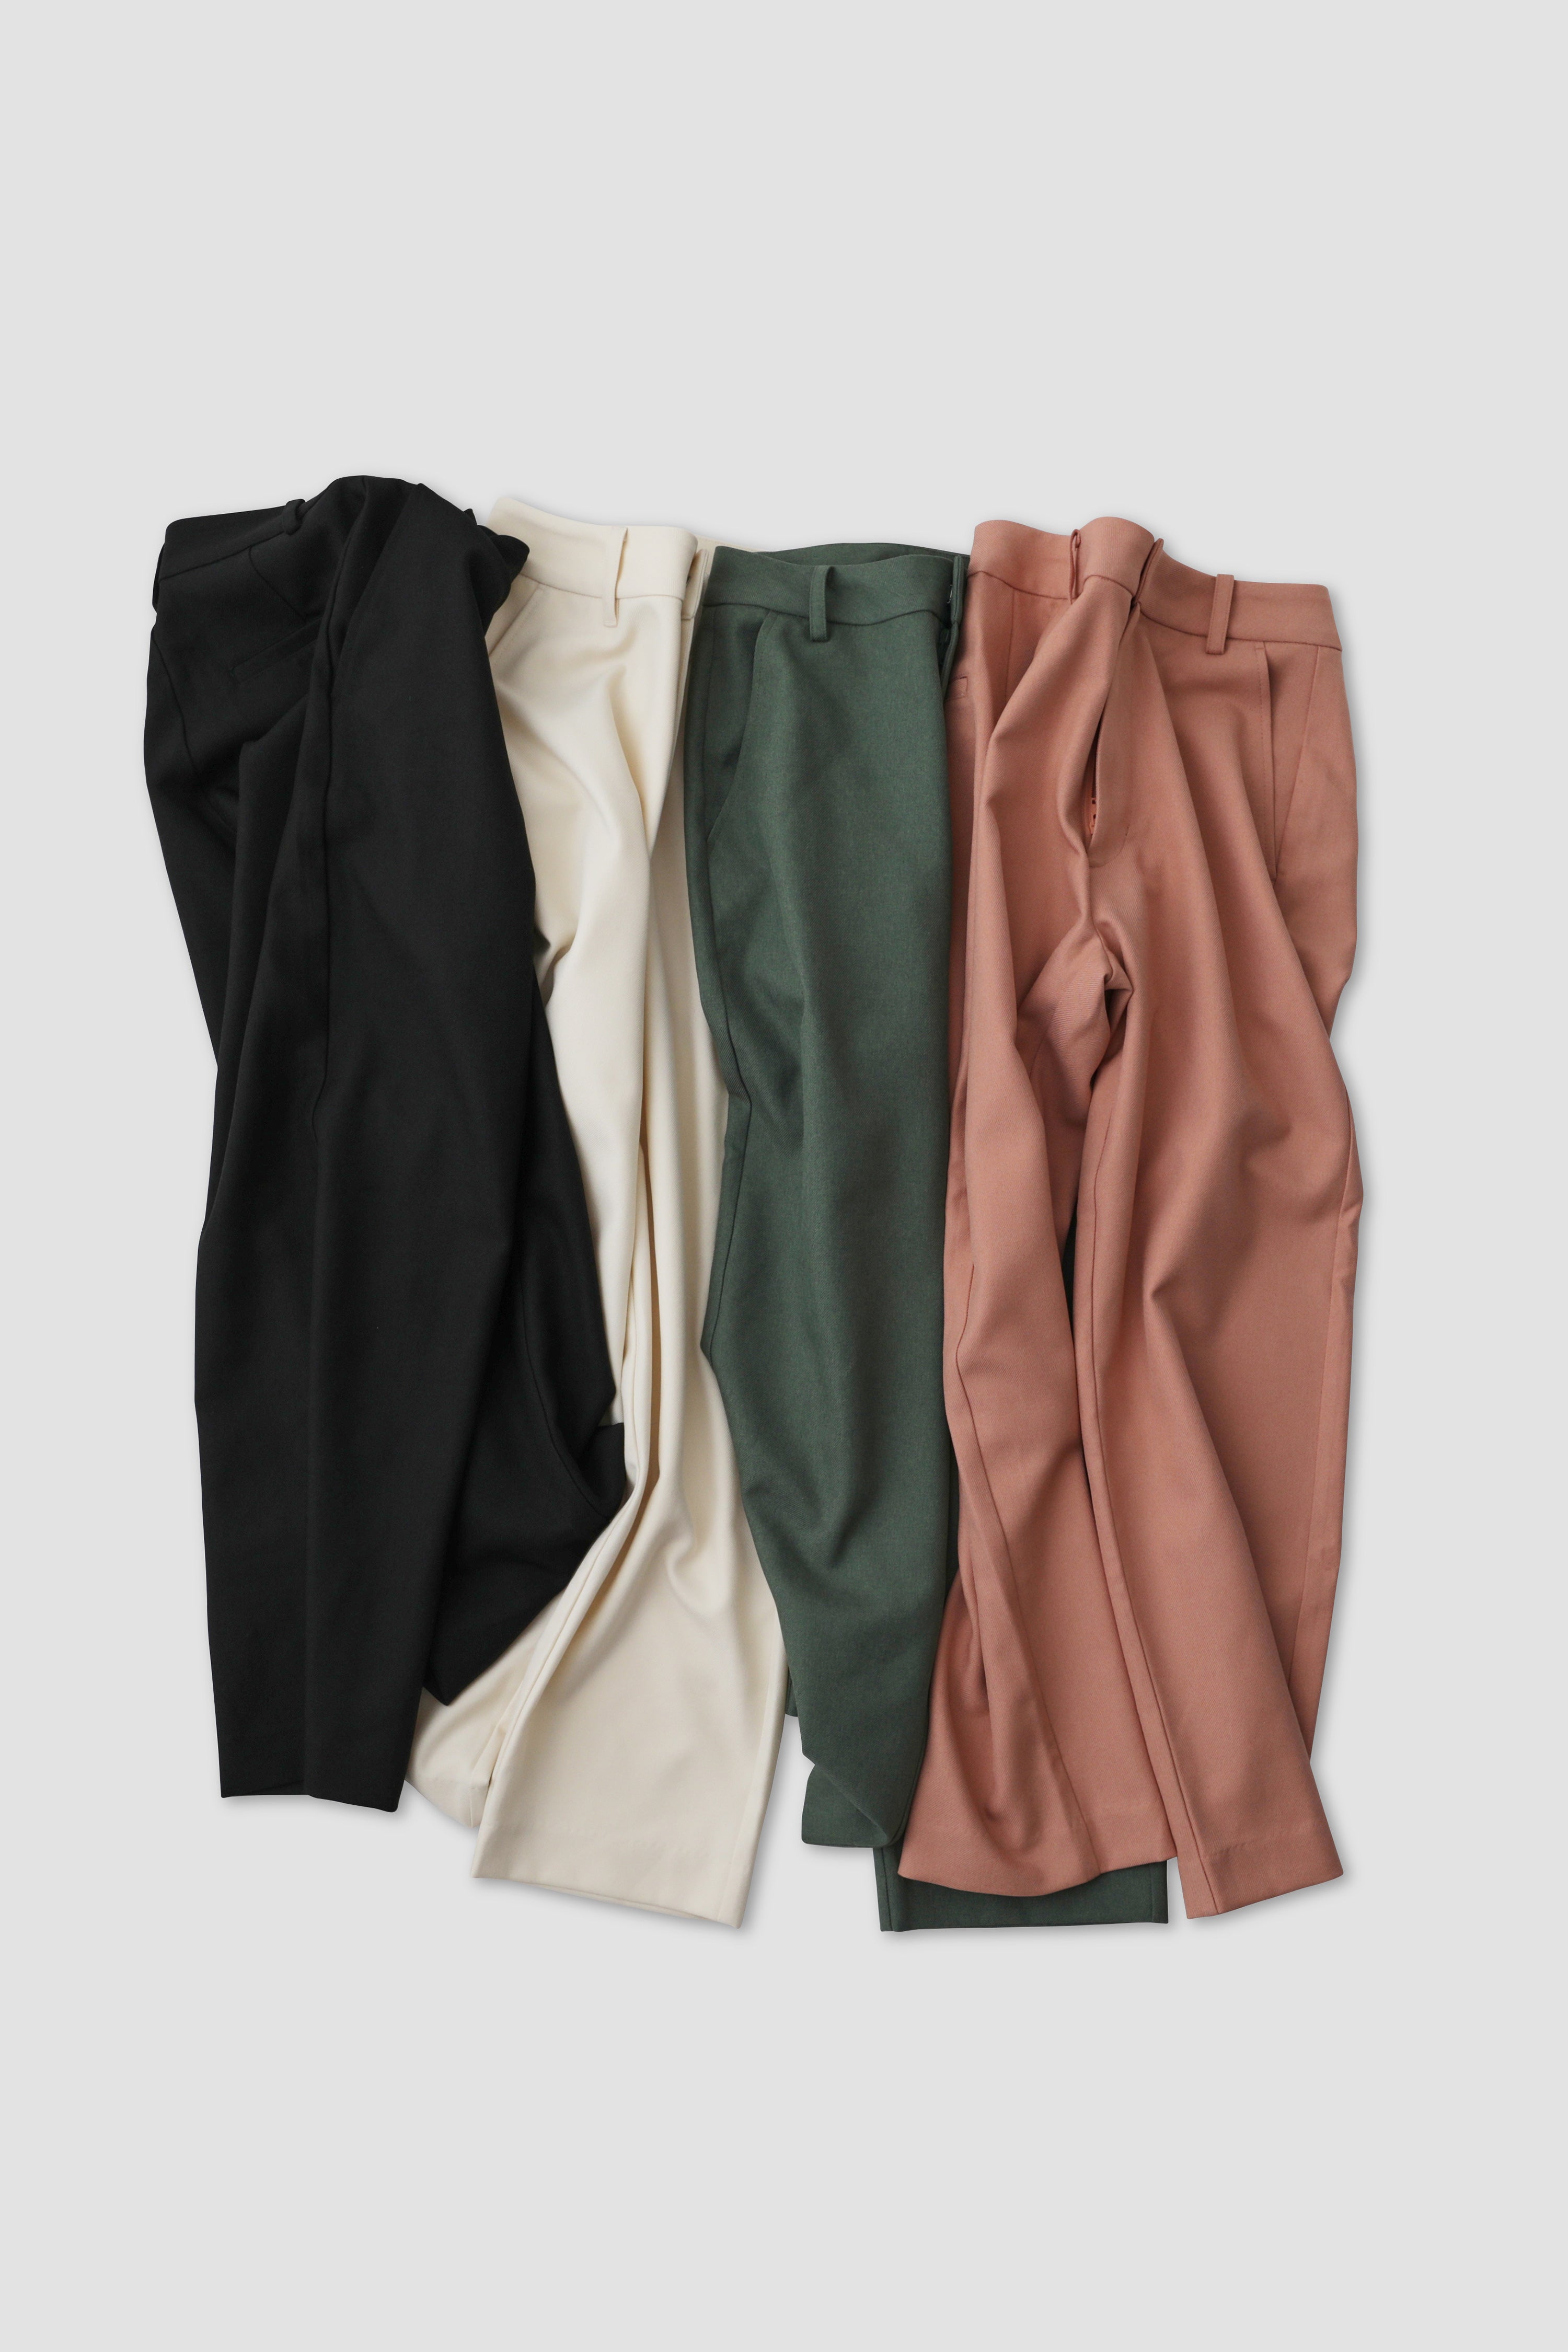 NEUTRAL TAPERED PANTS